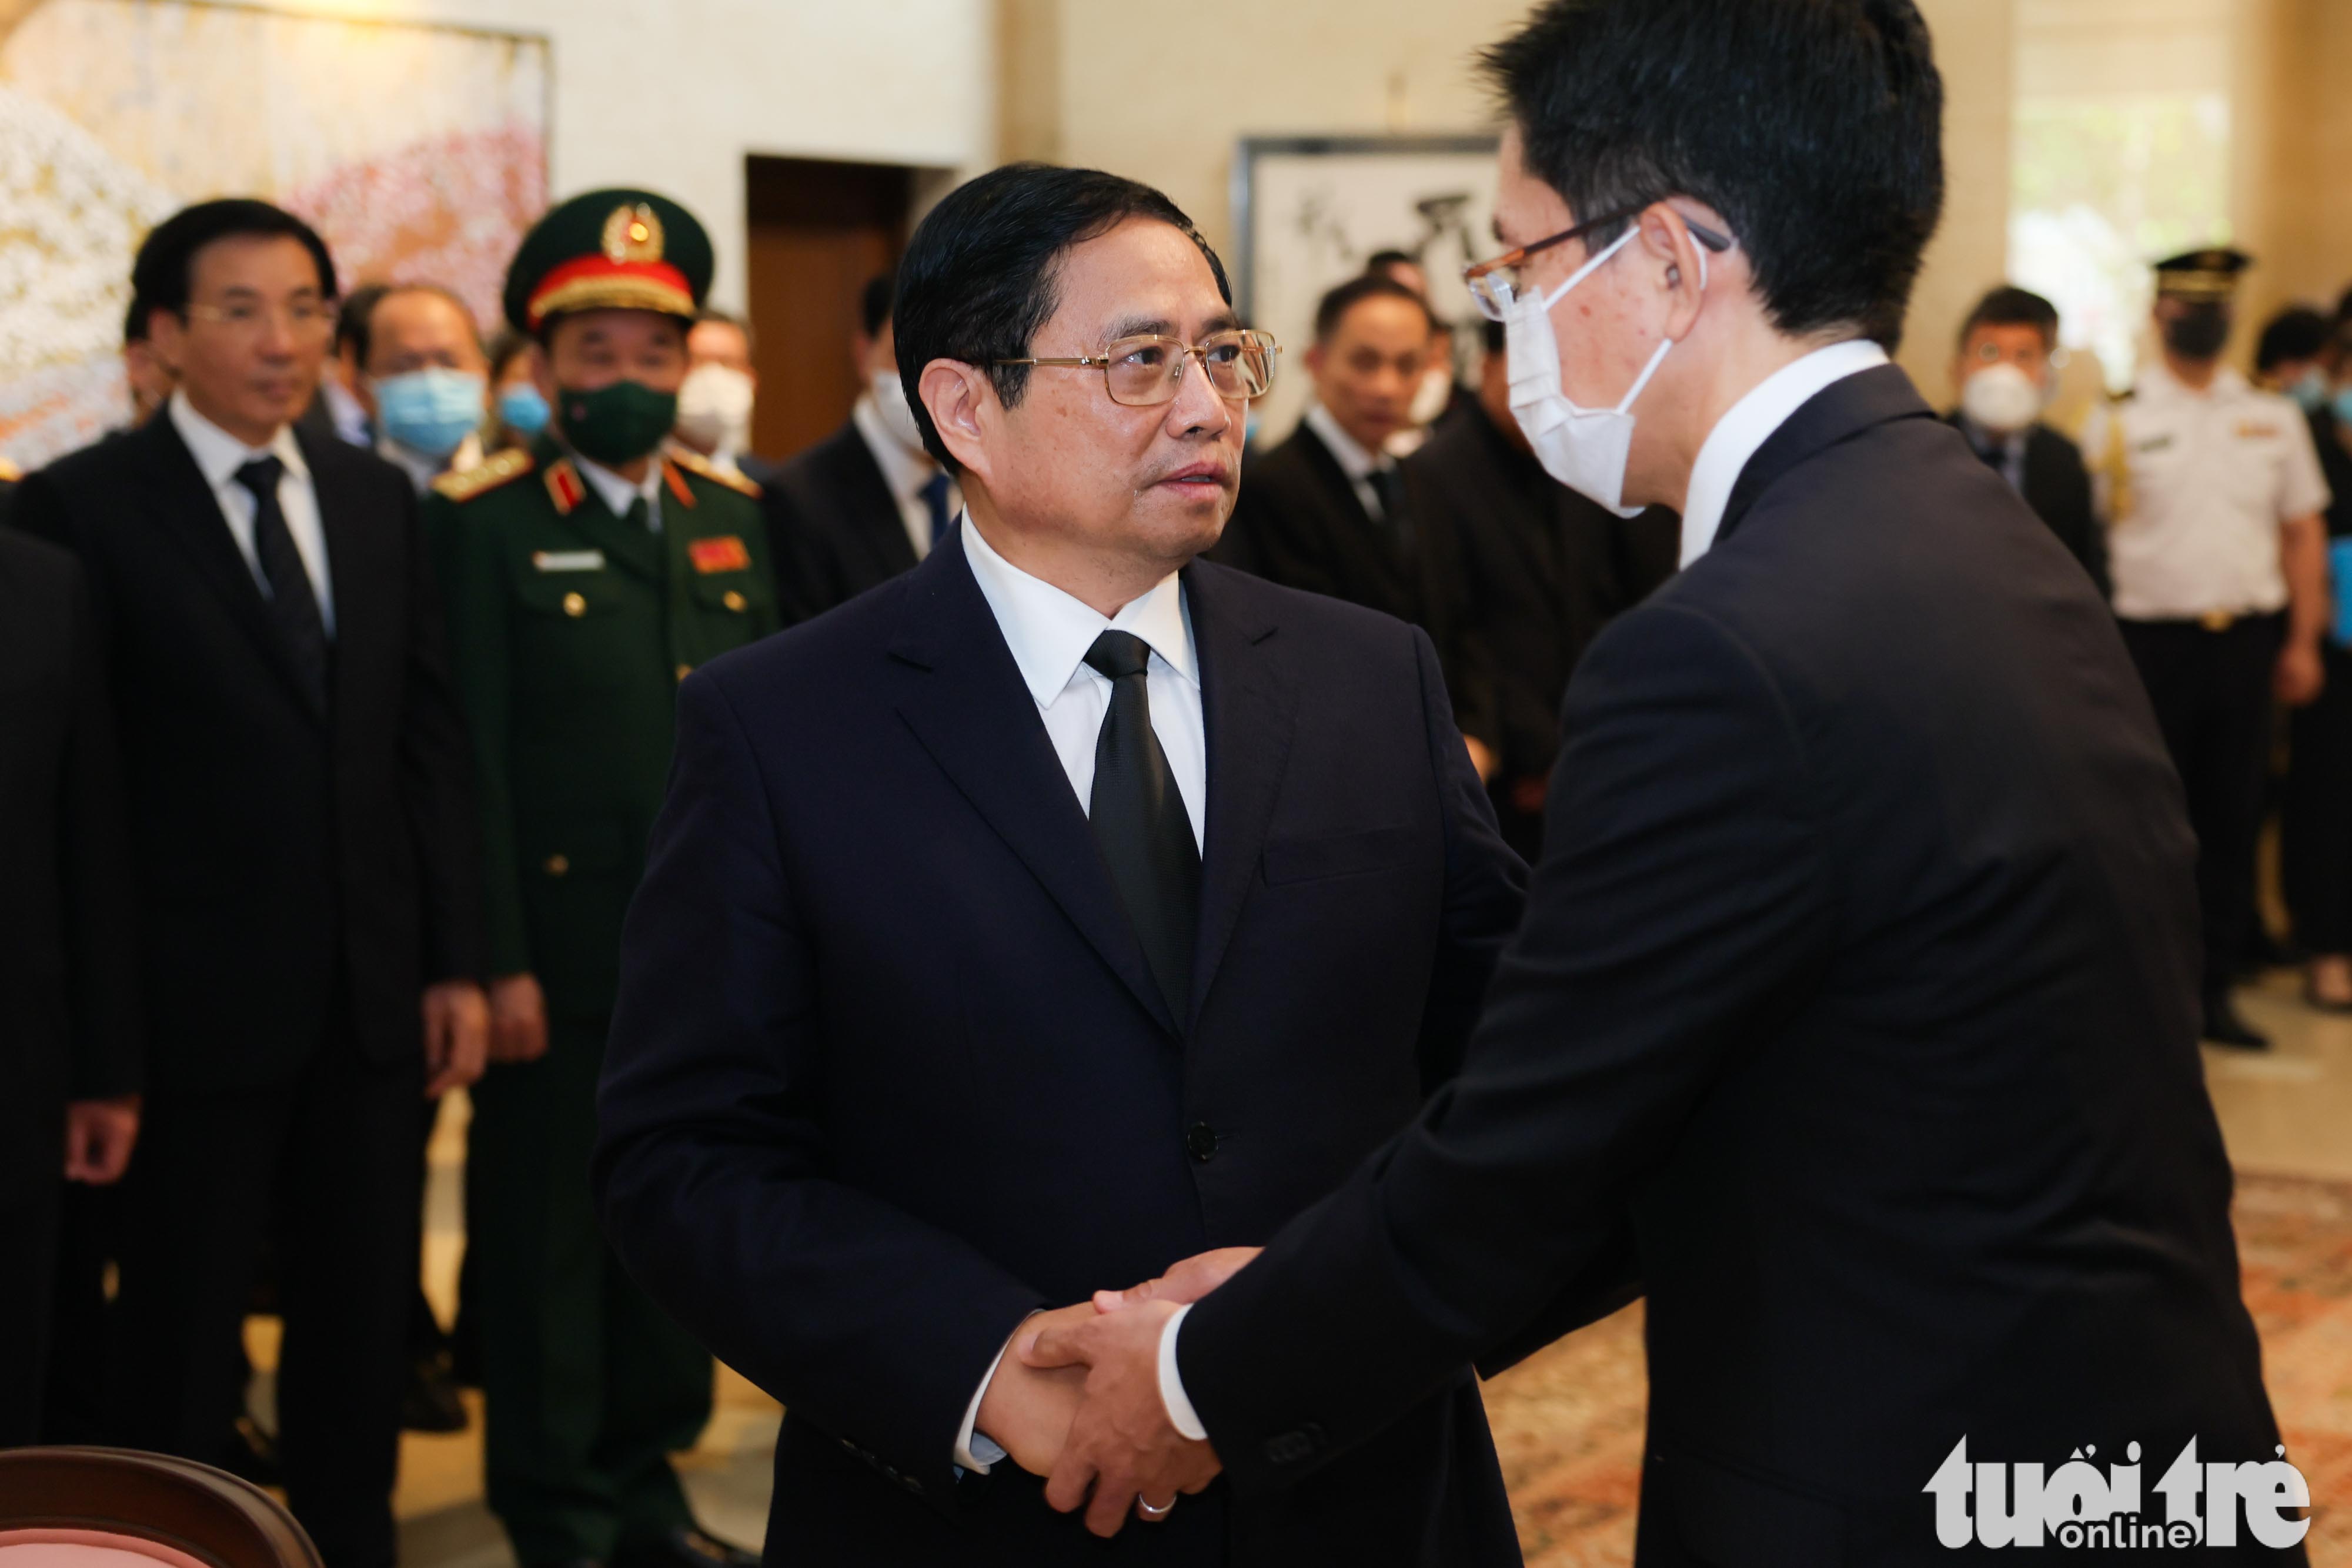 Vietnamese Prime Minister Pham Minh Chinh extends his condolences to the Chargé d'affaires of the Japanese Embassy in Vietnam, July 11, 2022. Photo: Nguyen Khanh / Tuoi Tre